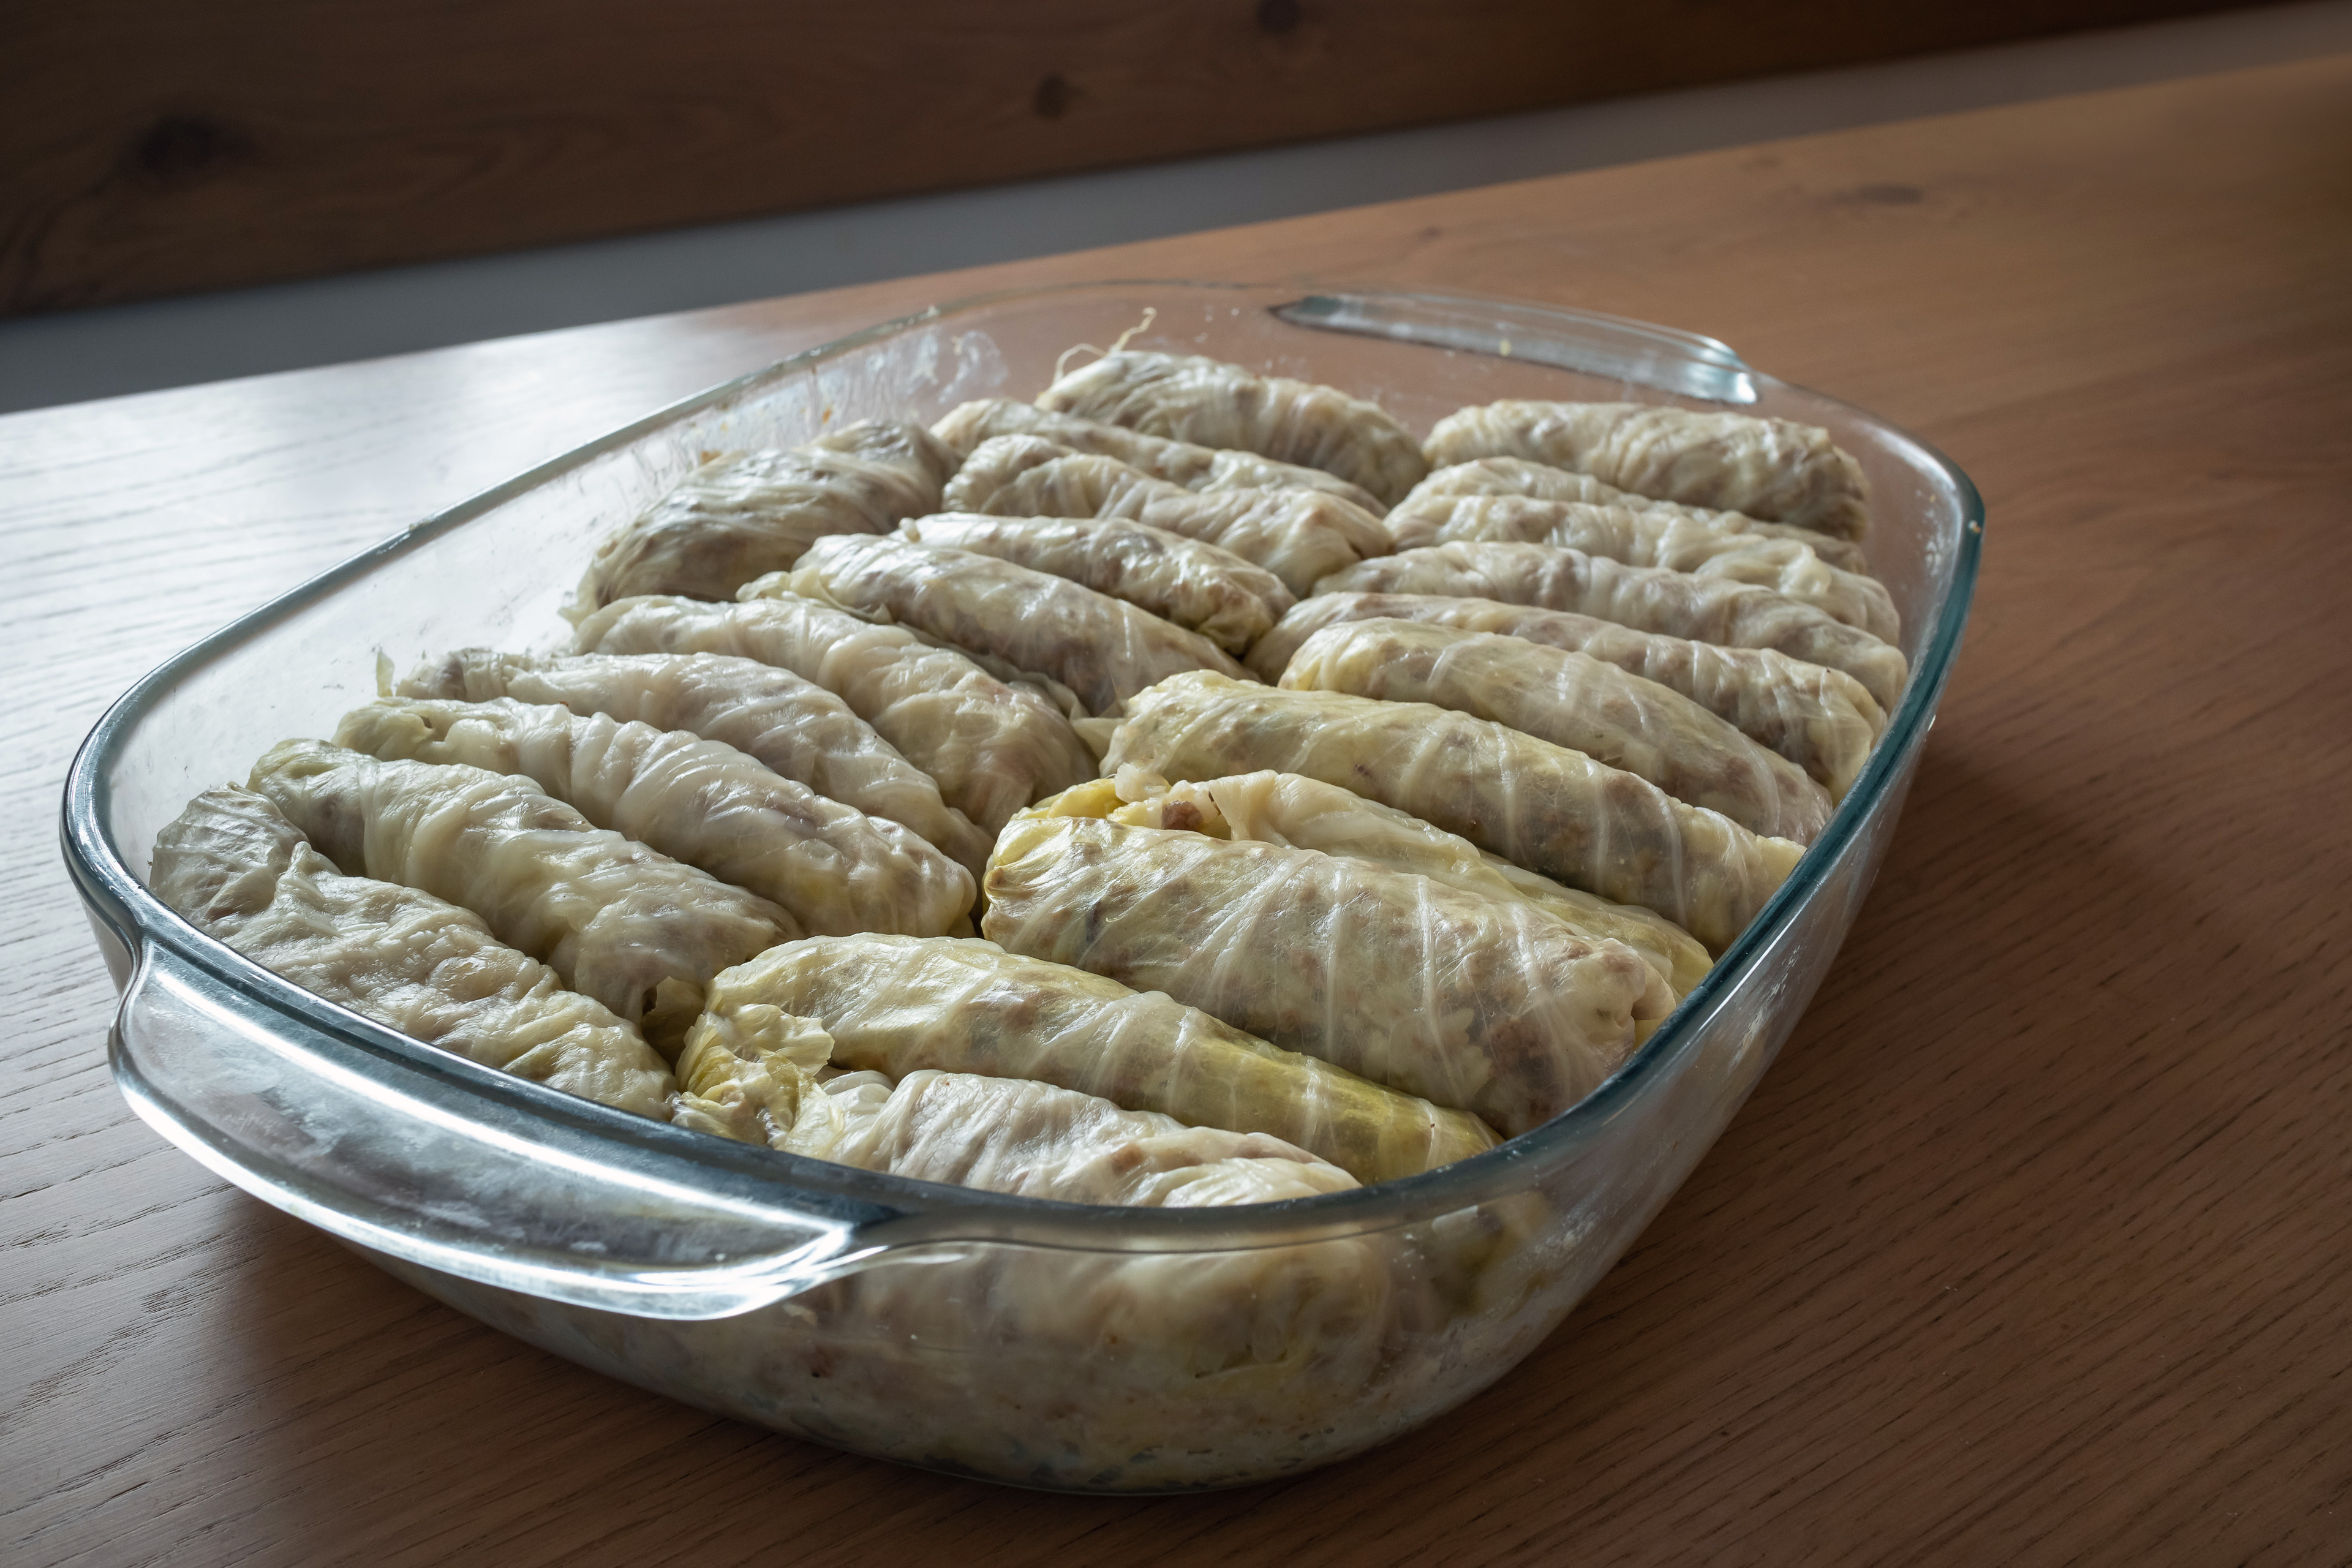 Cabbage rolls in a glass baking pan